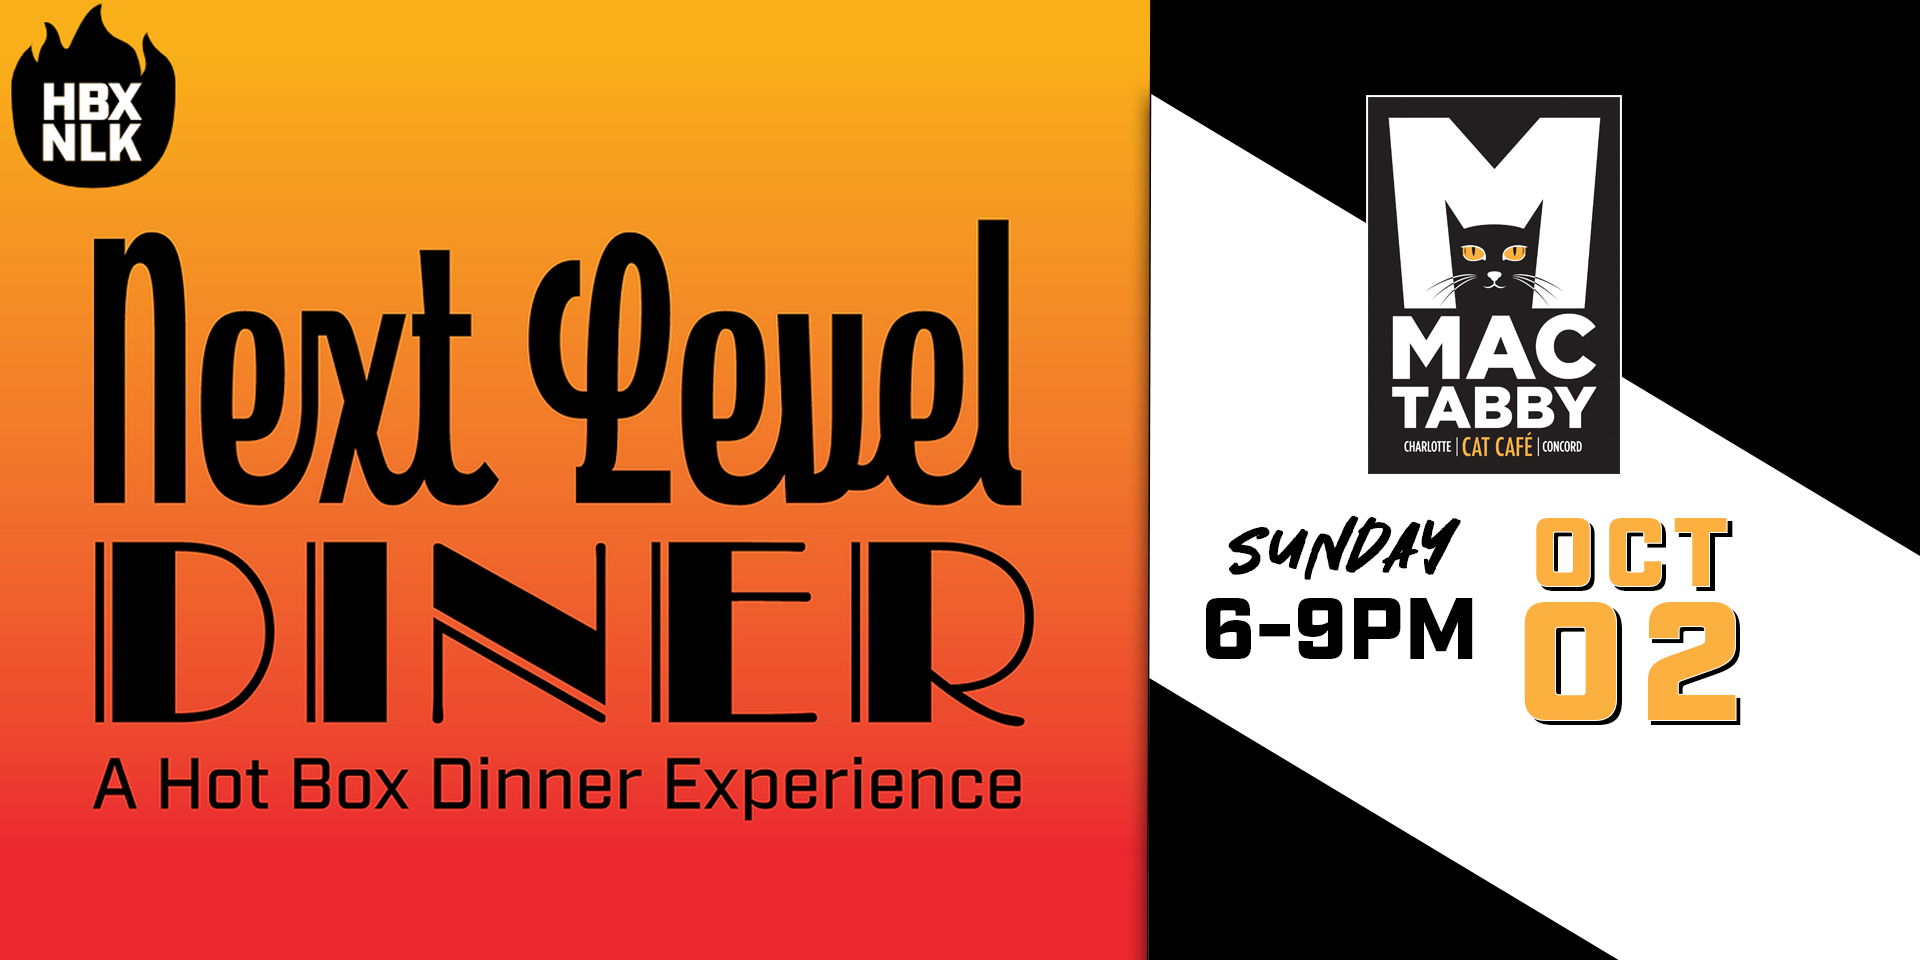 Hot Box Next Level Kitchen Presents: Next Level Diner at Mac Tabby promotional image